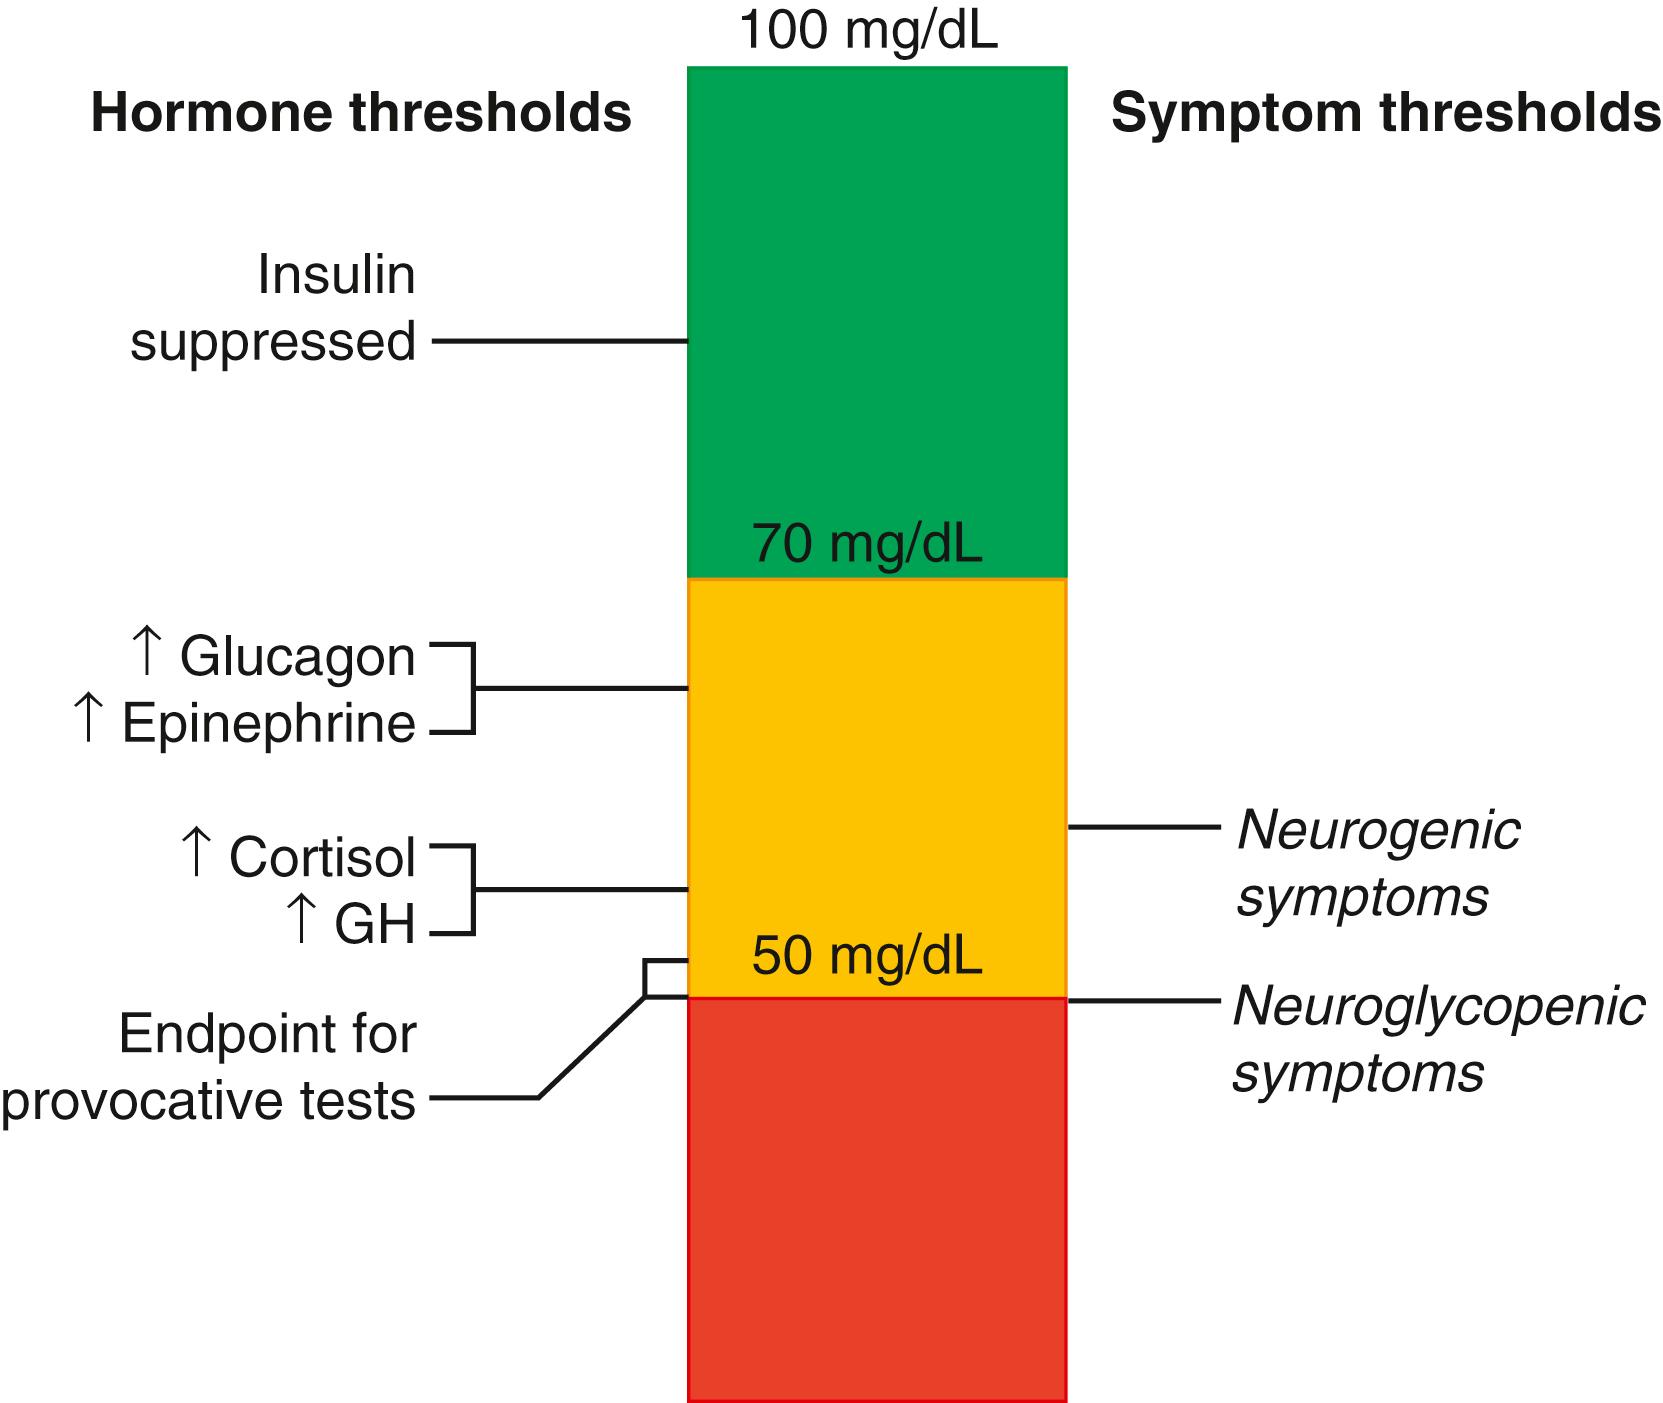 Fig. 152.1, Glucose thresholds for neuroendocrine and neuroglycopenic responses to hypoglycemia. As plasma glucose decreases towards 70 mg/dL, insulin secretion is suppressed. With further reductions in plasma glucose, glucagon and epinephrine secretion is increased, before growth hormone and cortisol secretion increases. Note that the thresholds for symptomatic hypoglycemia are lower than many of the thresholds for hormonal responses to reducing plasma glucose. GH, Growth hormone.